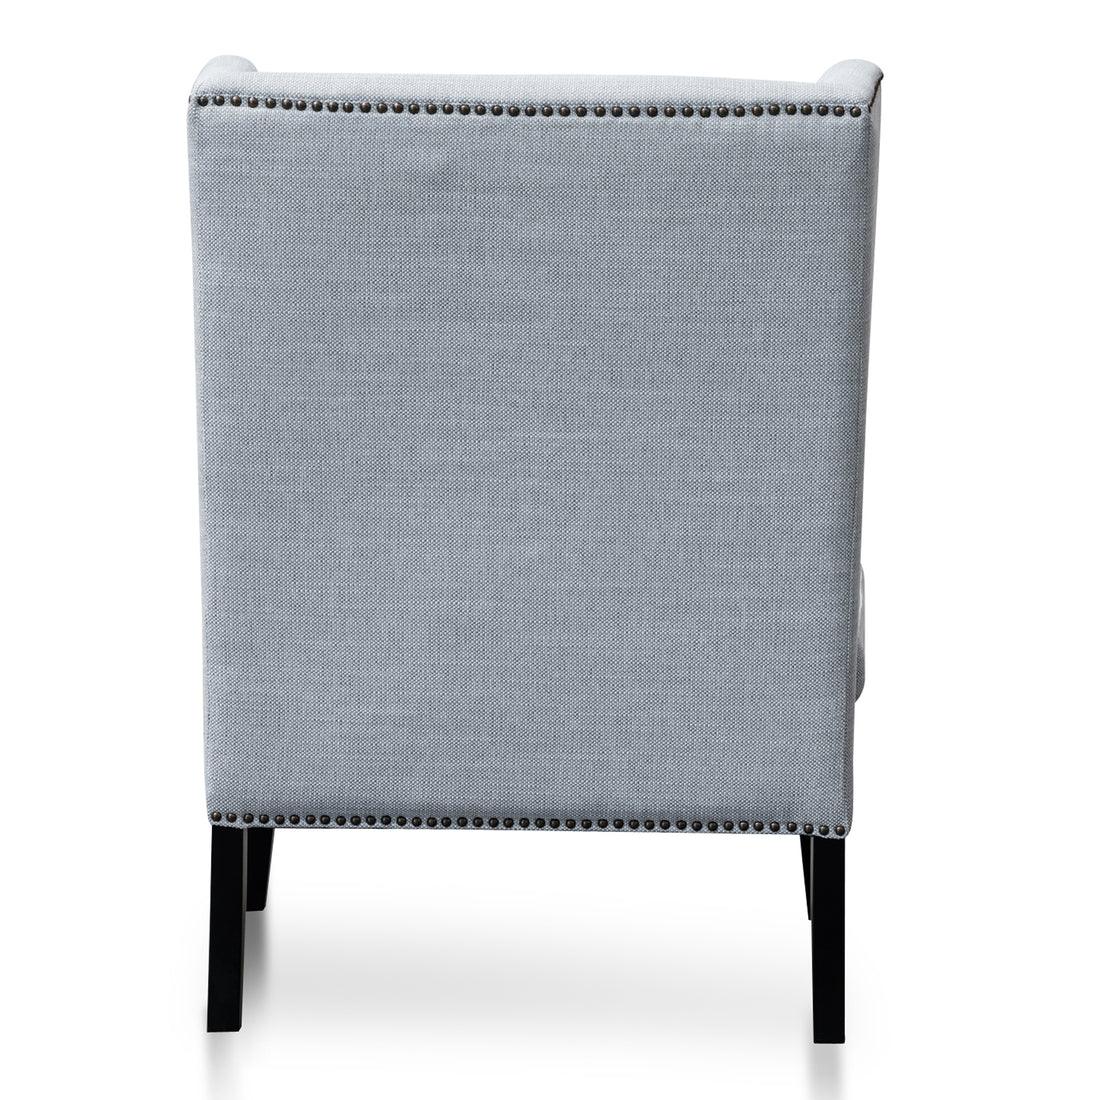 California Lounge Chair in Light Texture Grey - Furniture Castle